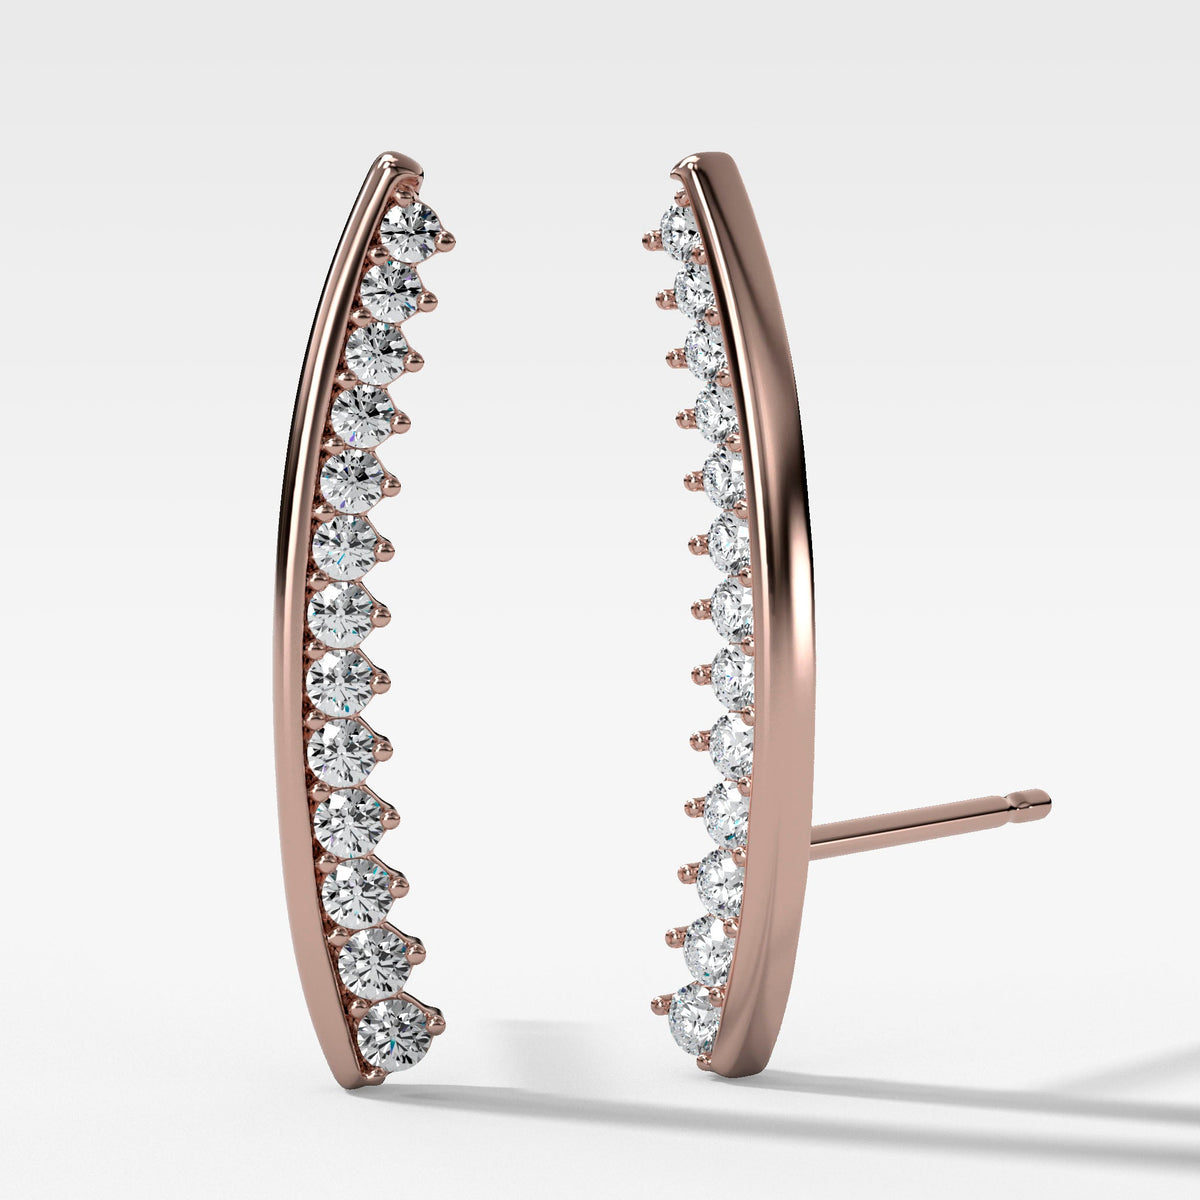 Diamond Ear Climbers in Rose Gold by Good Stone